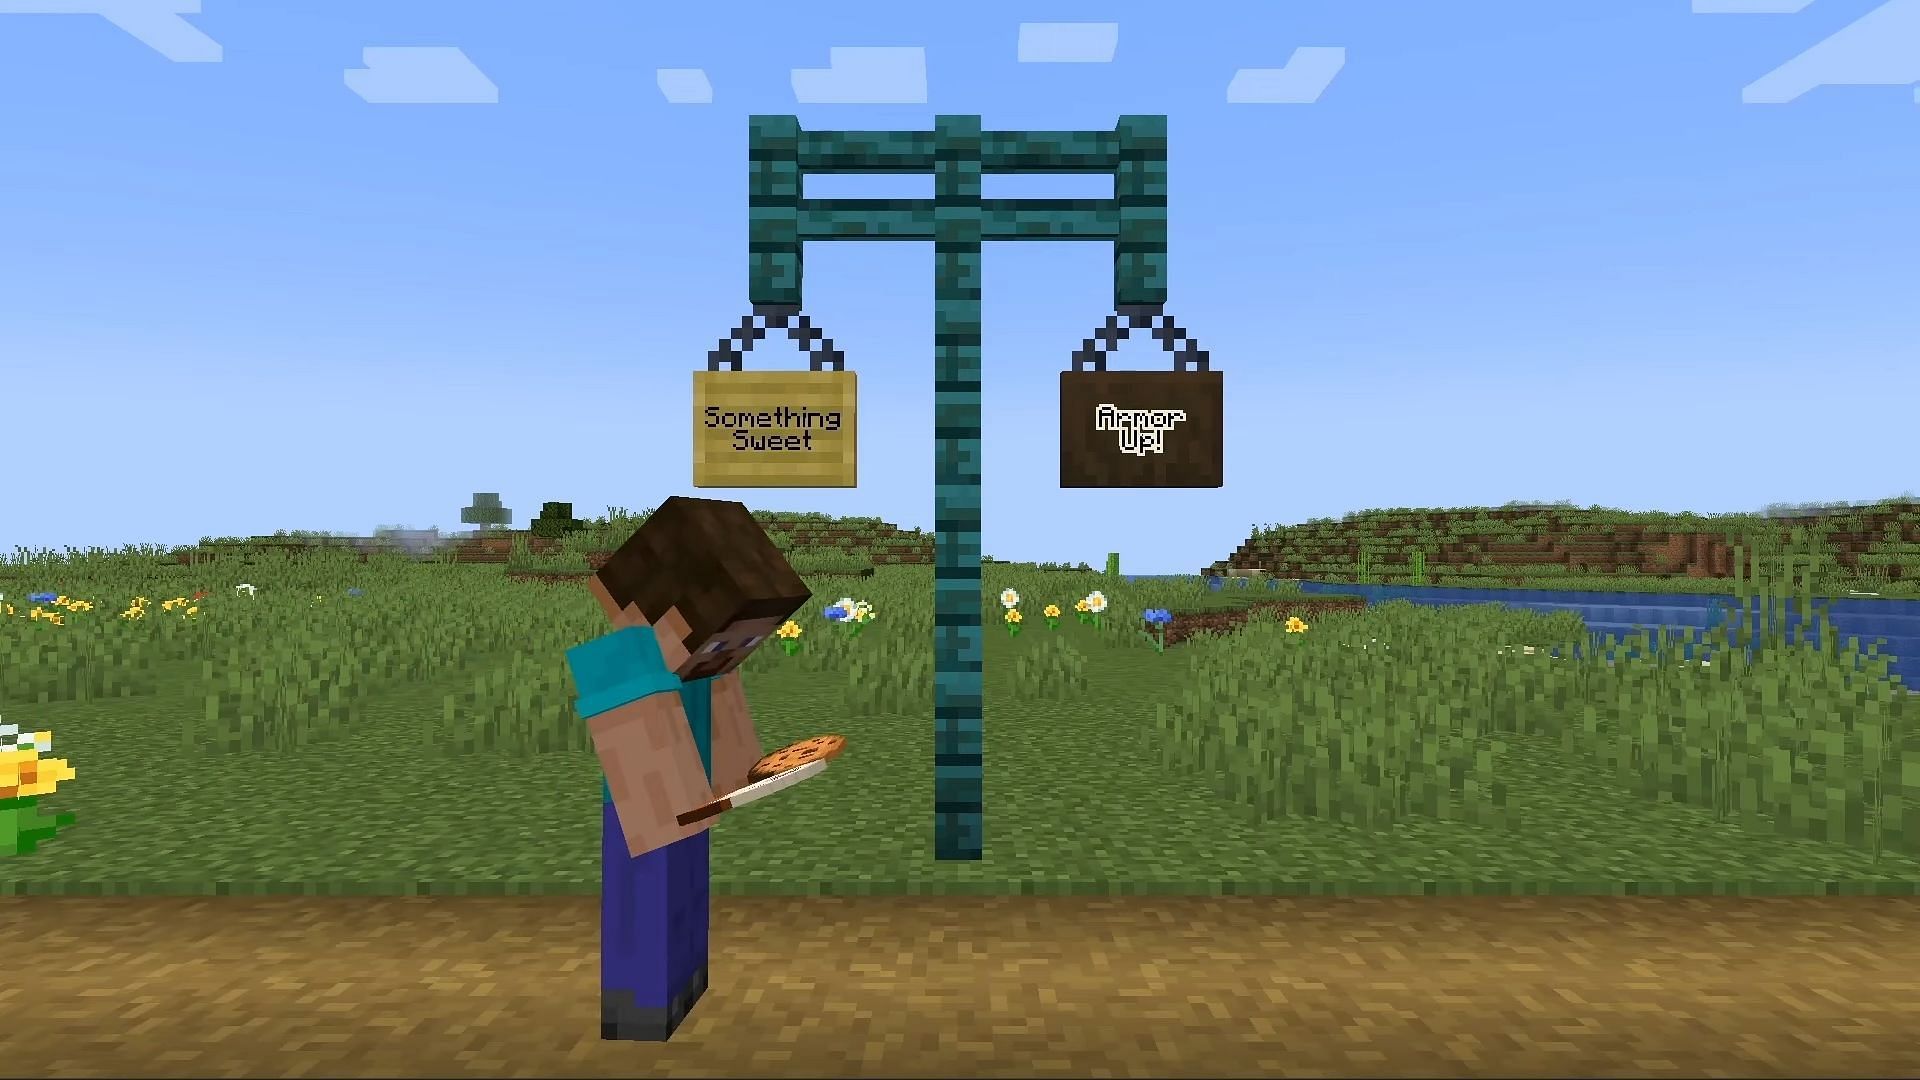 Hanging signs are a unique addition that will feature in the game after the 1.20 update (Image via Mojang)